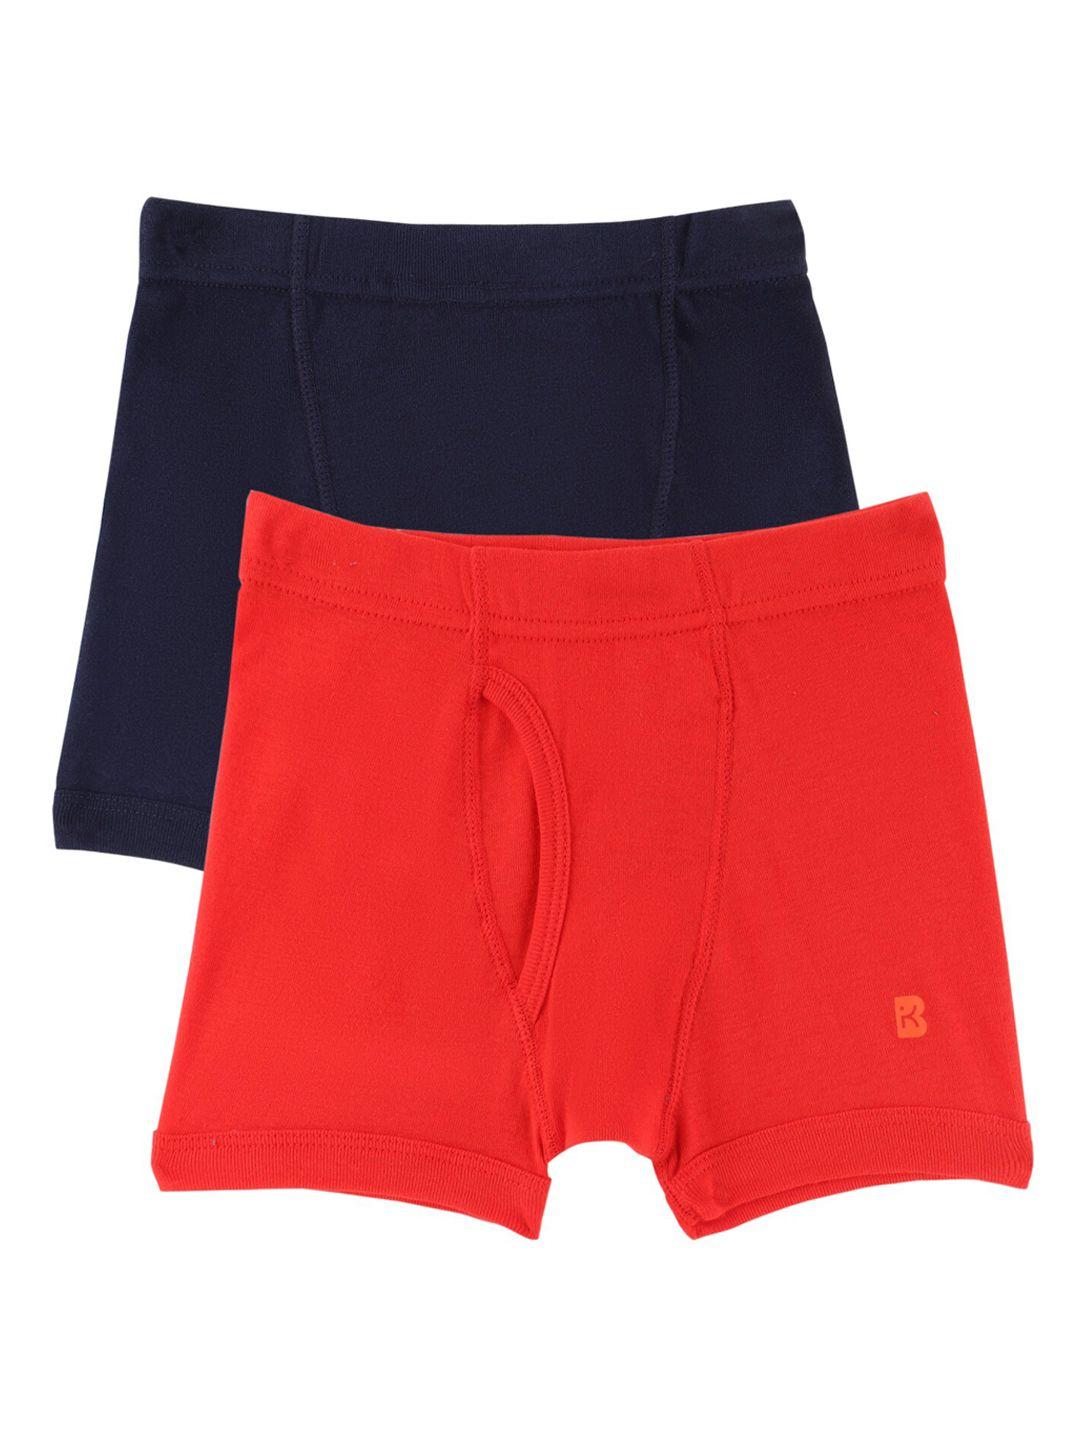 bodycare kids boys pack of 2 red & navy blue solid cotton trunk